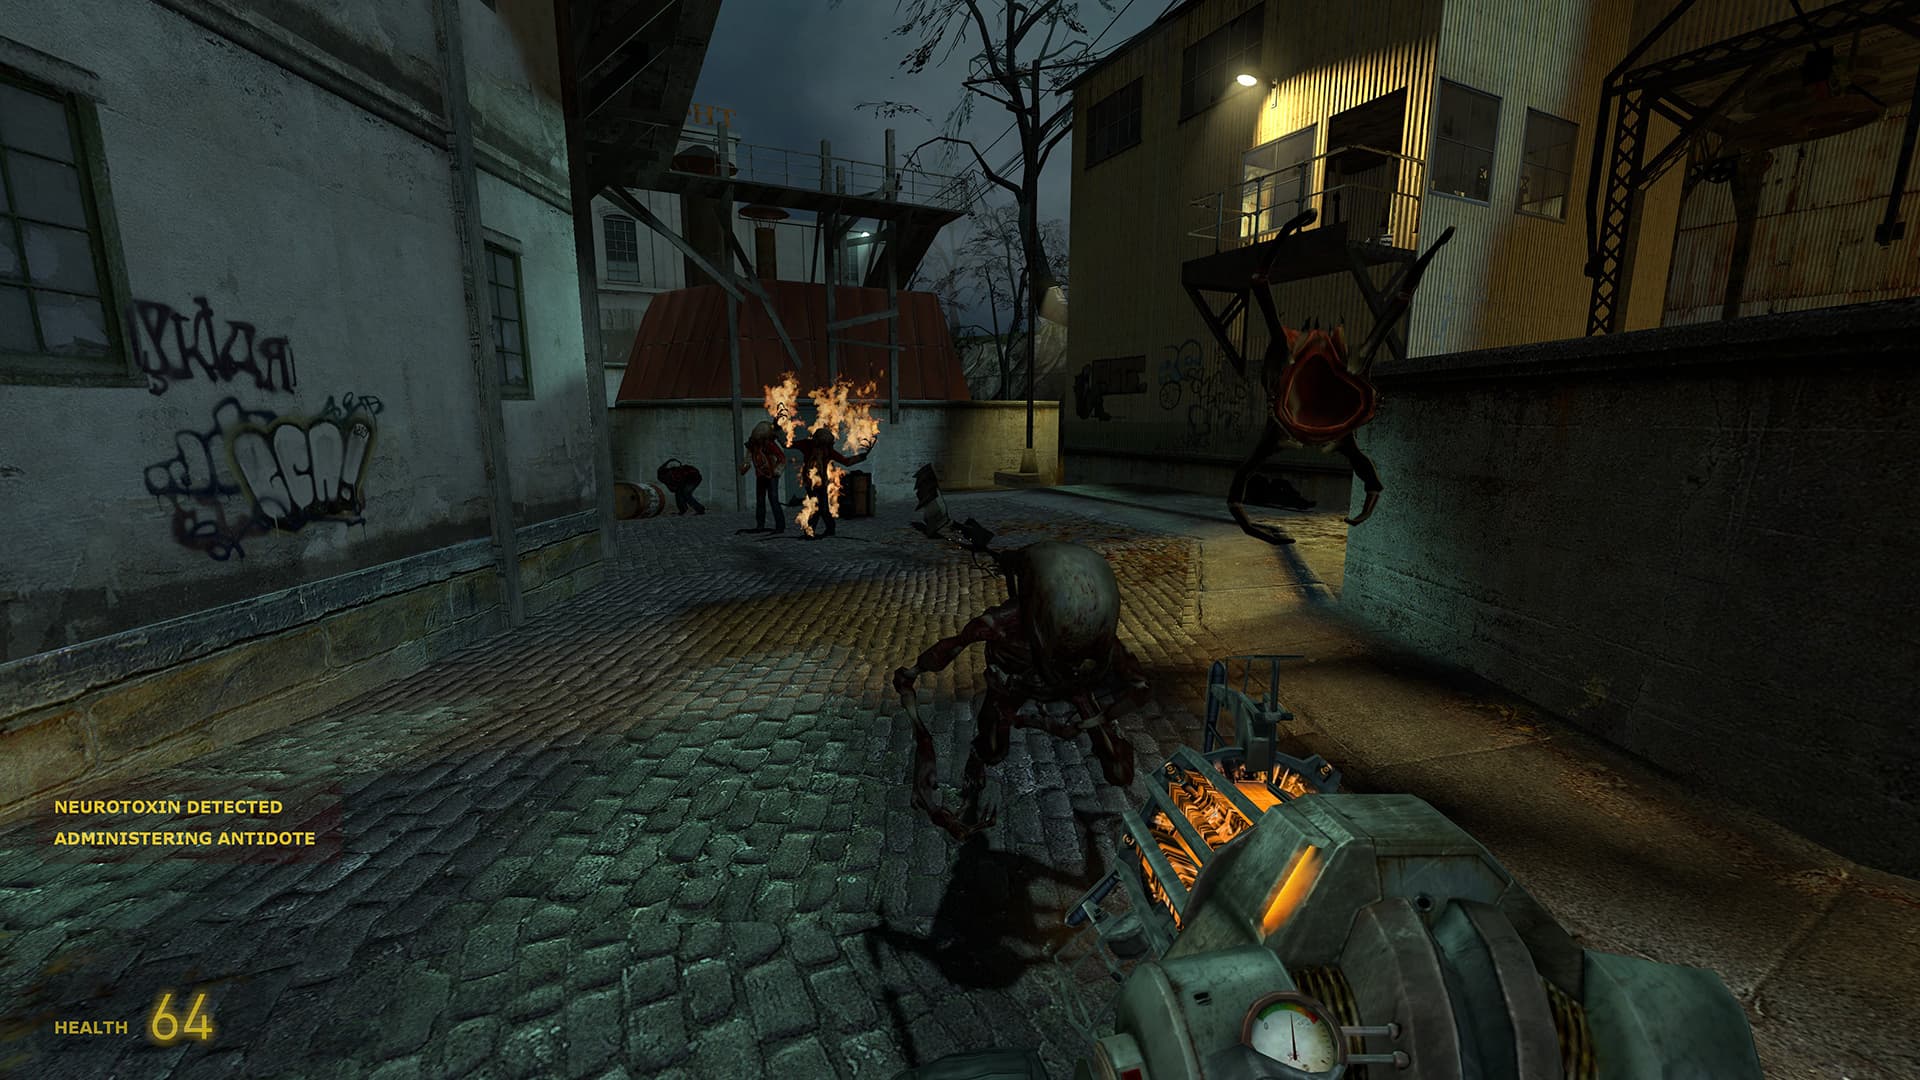 A screenshot from Half-Life 2. A poison headcrab leaps at the player as a fast zombie rushes at them in Ravenholm. Behind them, multiple zombies, one of which is on fire, can be seen.